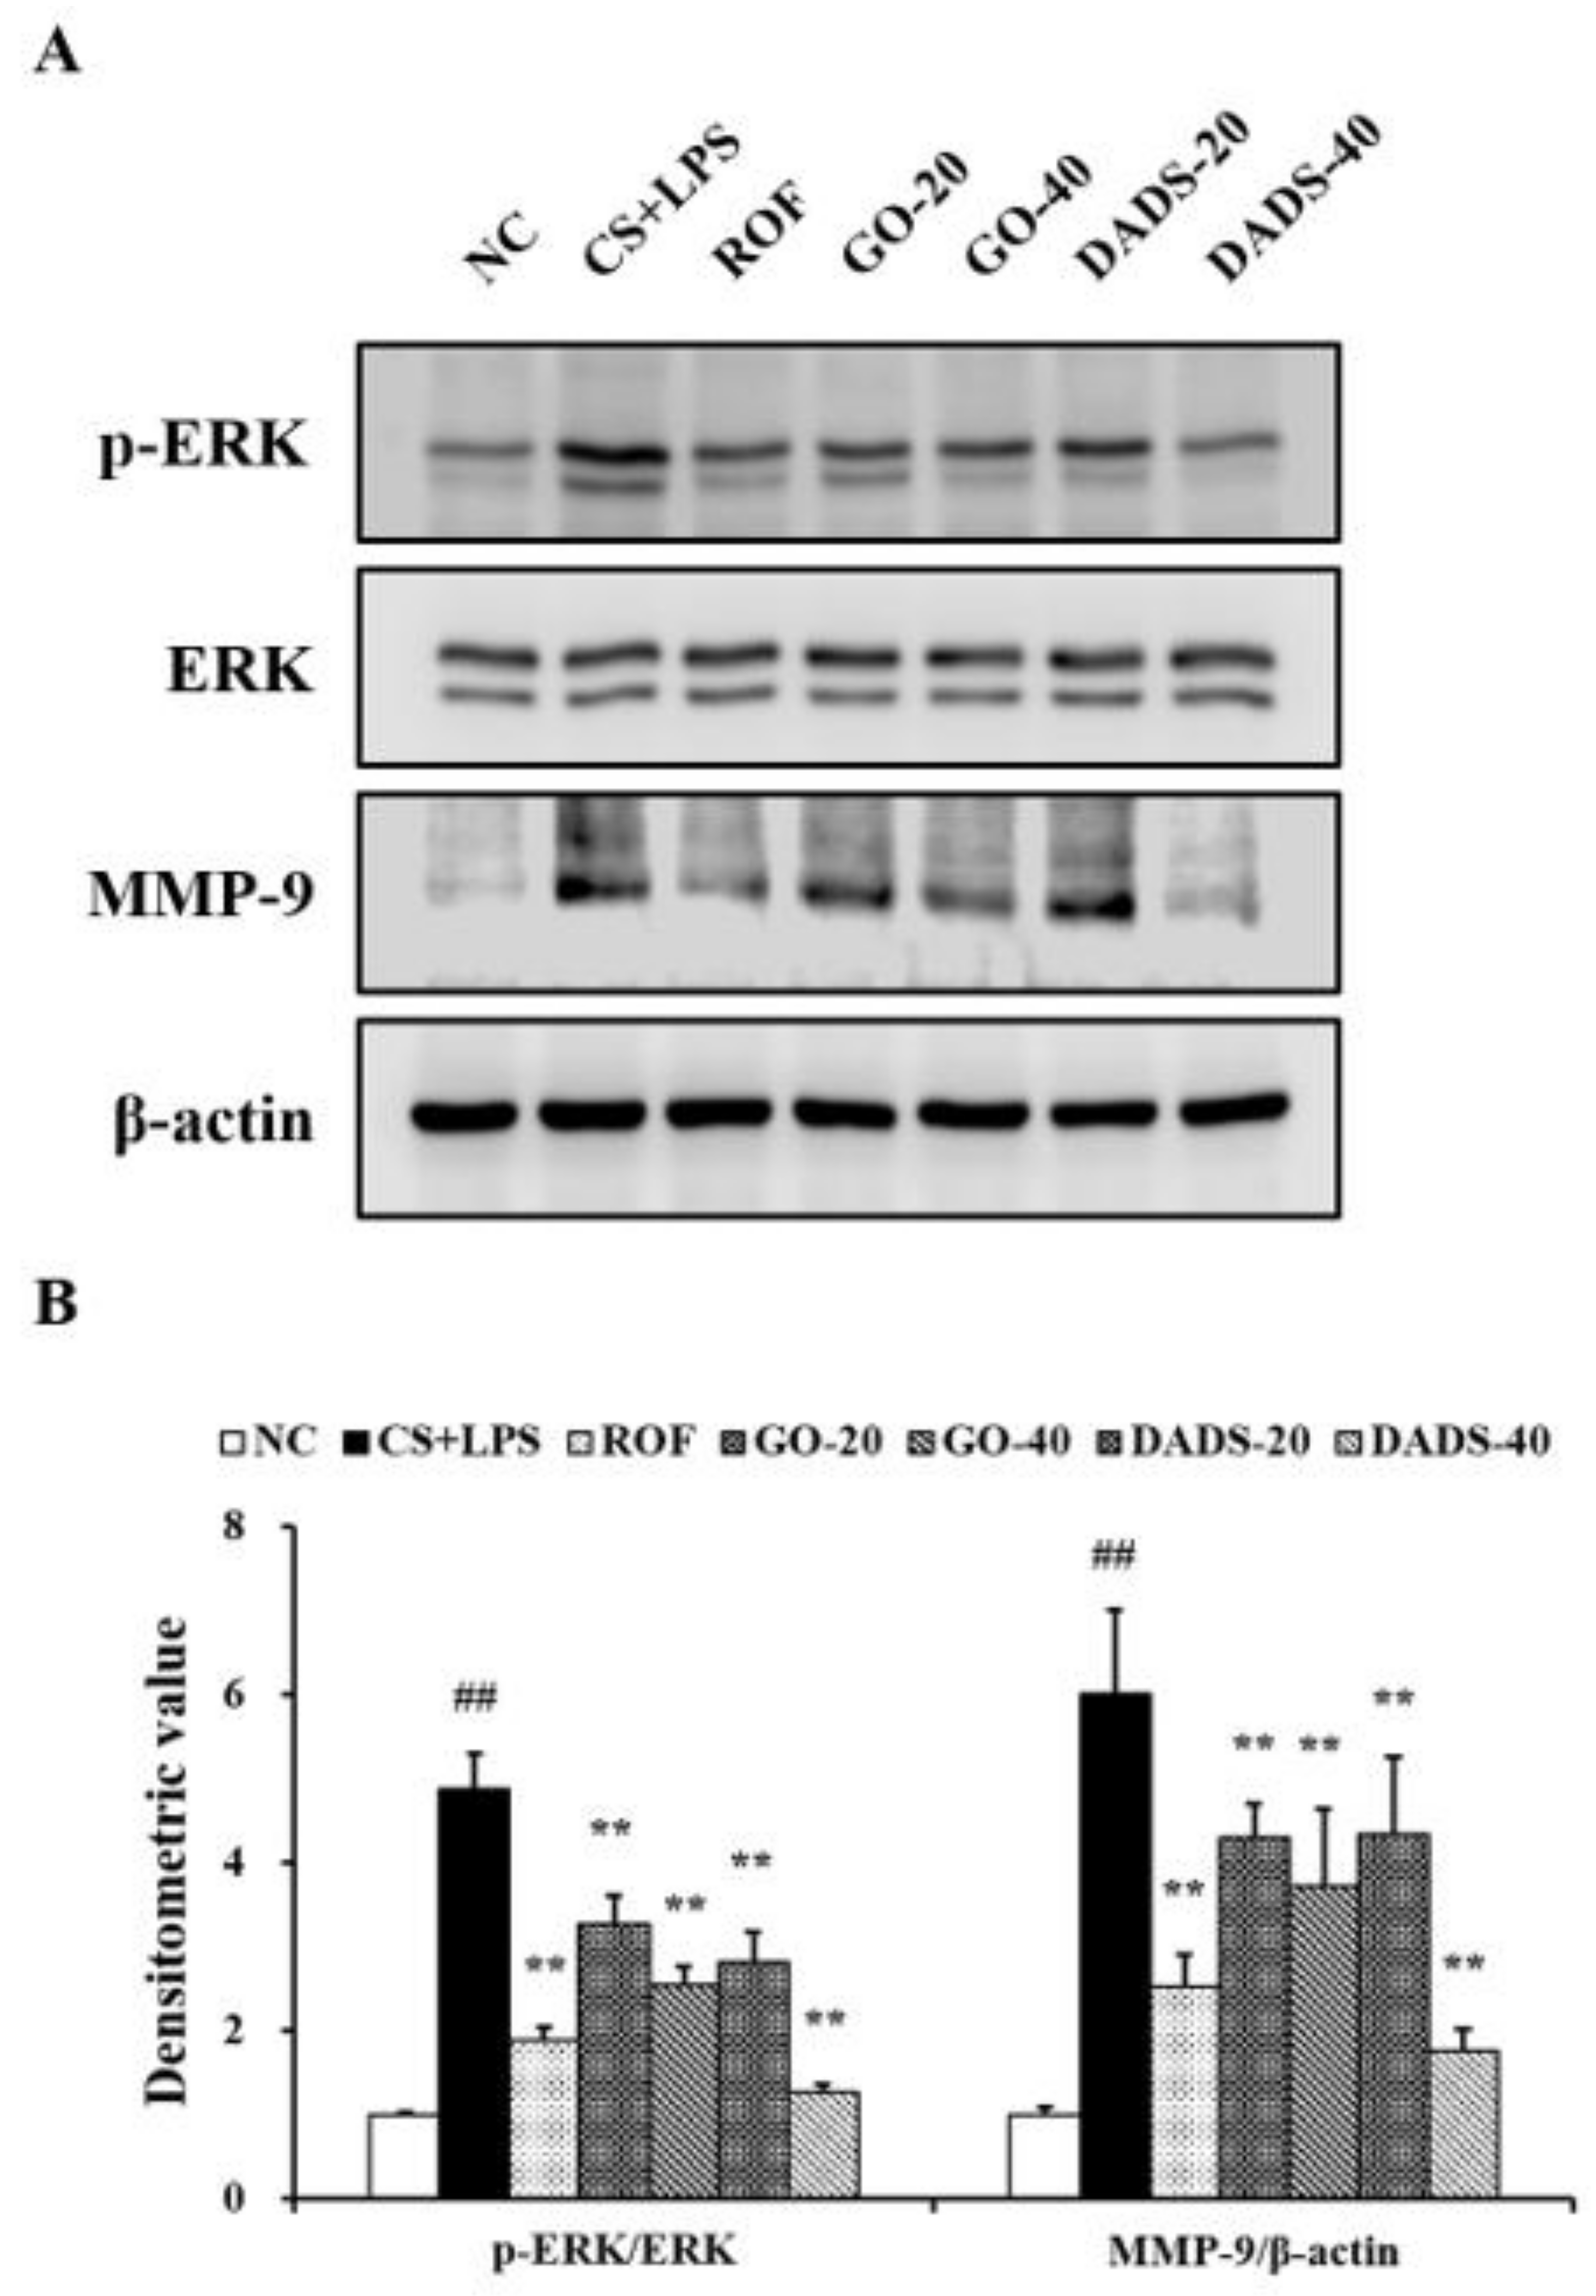 Nutrients Free Full Text Preventive Effect Of Garlic Oil And Its Organosulfur Component Diallyl Disulfide On Cigarette Smoke Induced Airway Inflammation In Mice Html